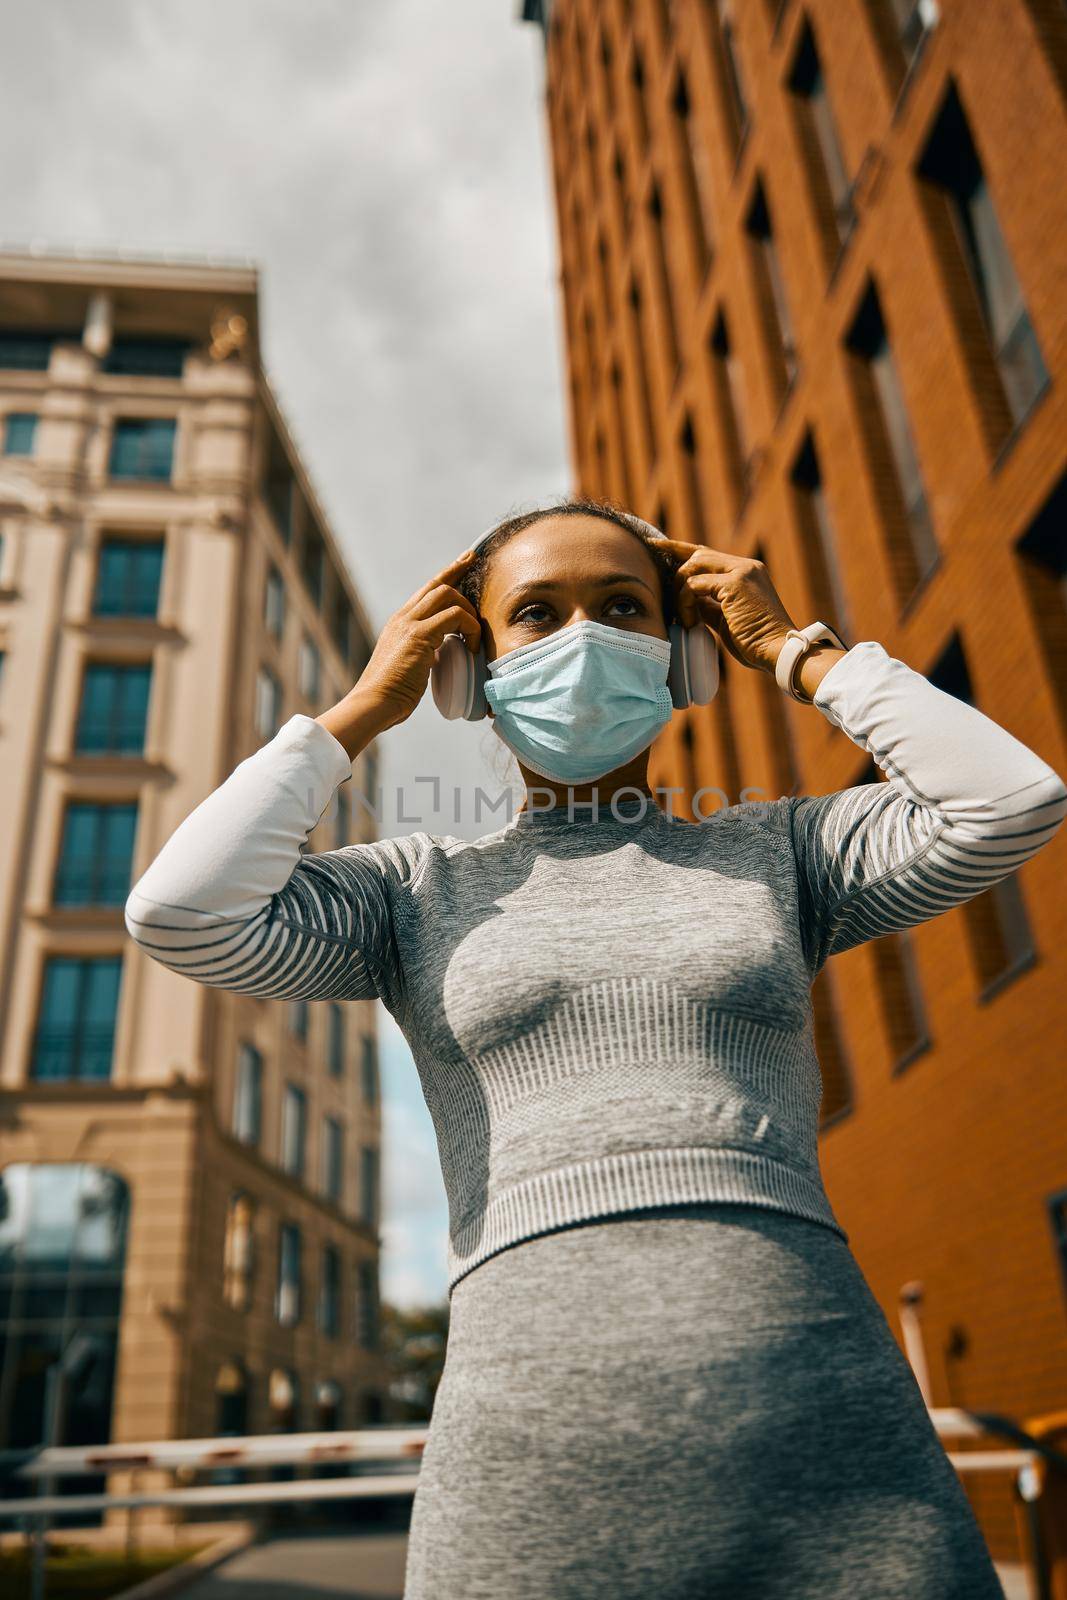 Focused female athlete wearing headphones and a mask while jogging outdoors in the daytime